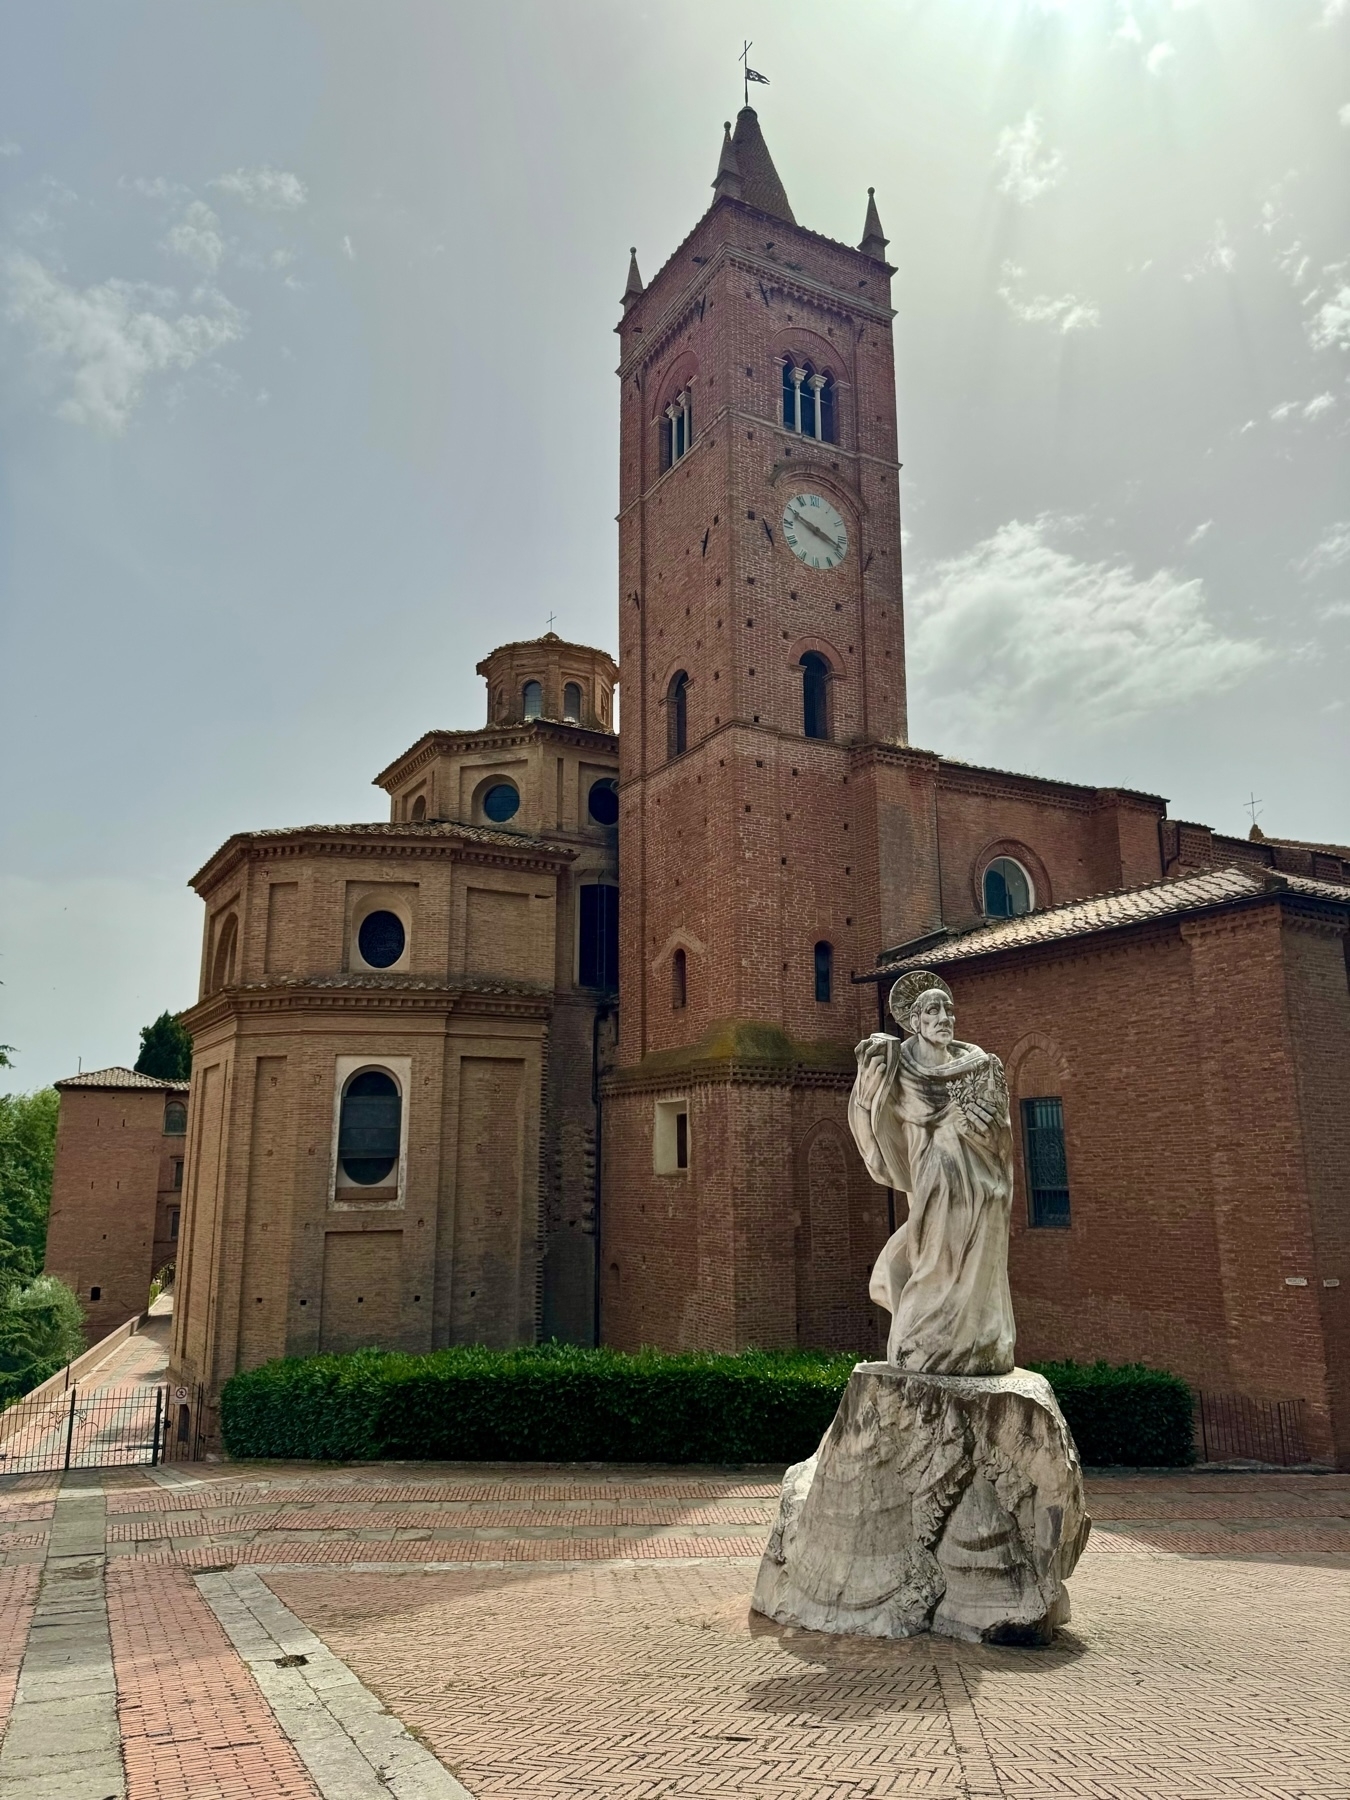 A tall brick church with a clock tower and arched windows under a sunny sky. In front of the church, a white marble statue depicts a robed figure standing on a stone pedestal. The area around the church and statue is paved with red bricks. 